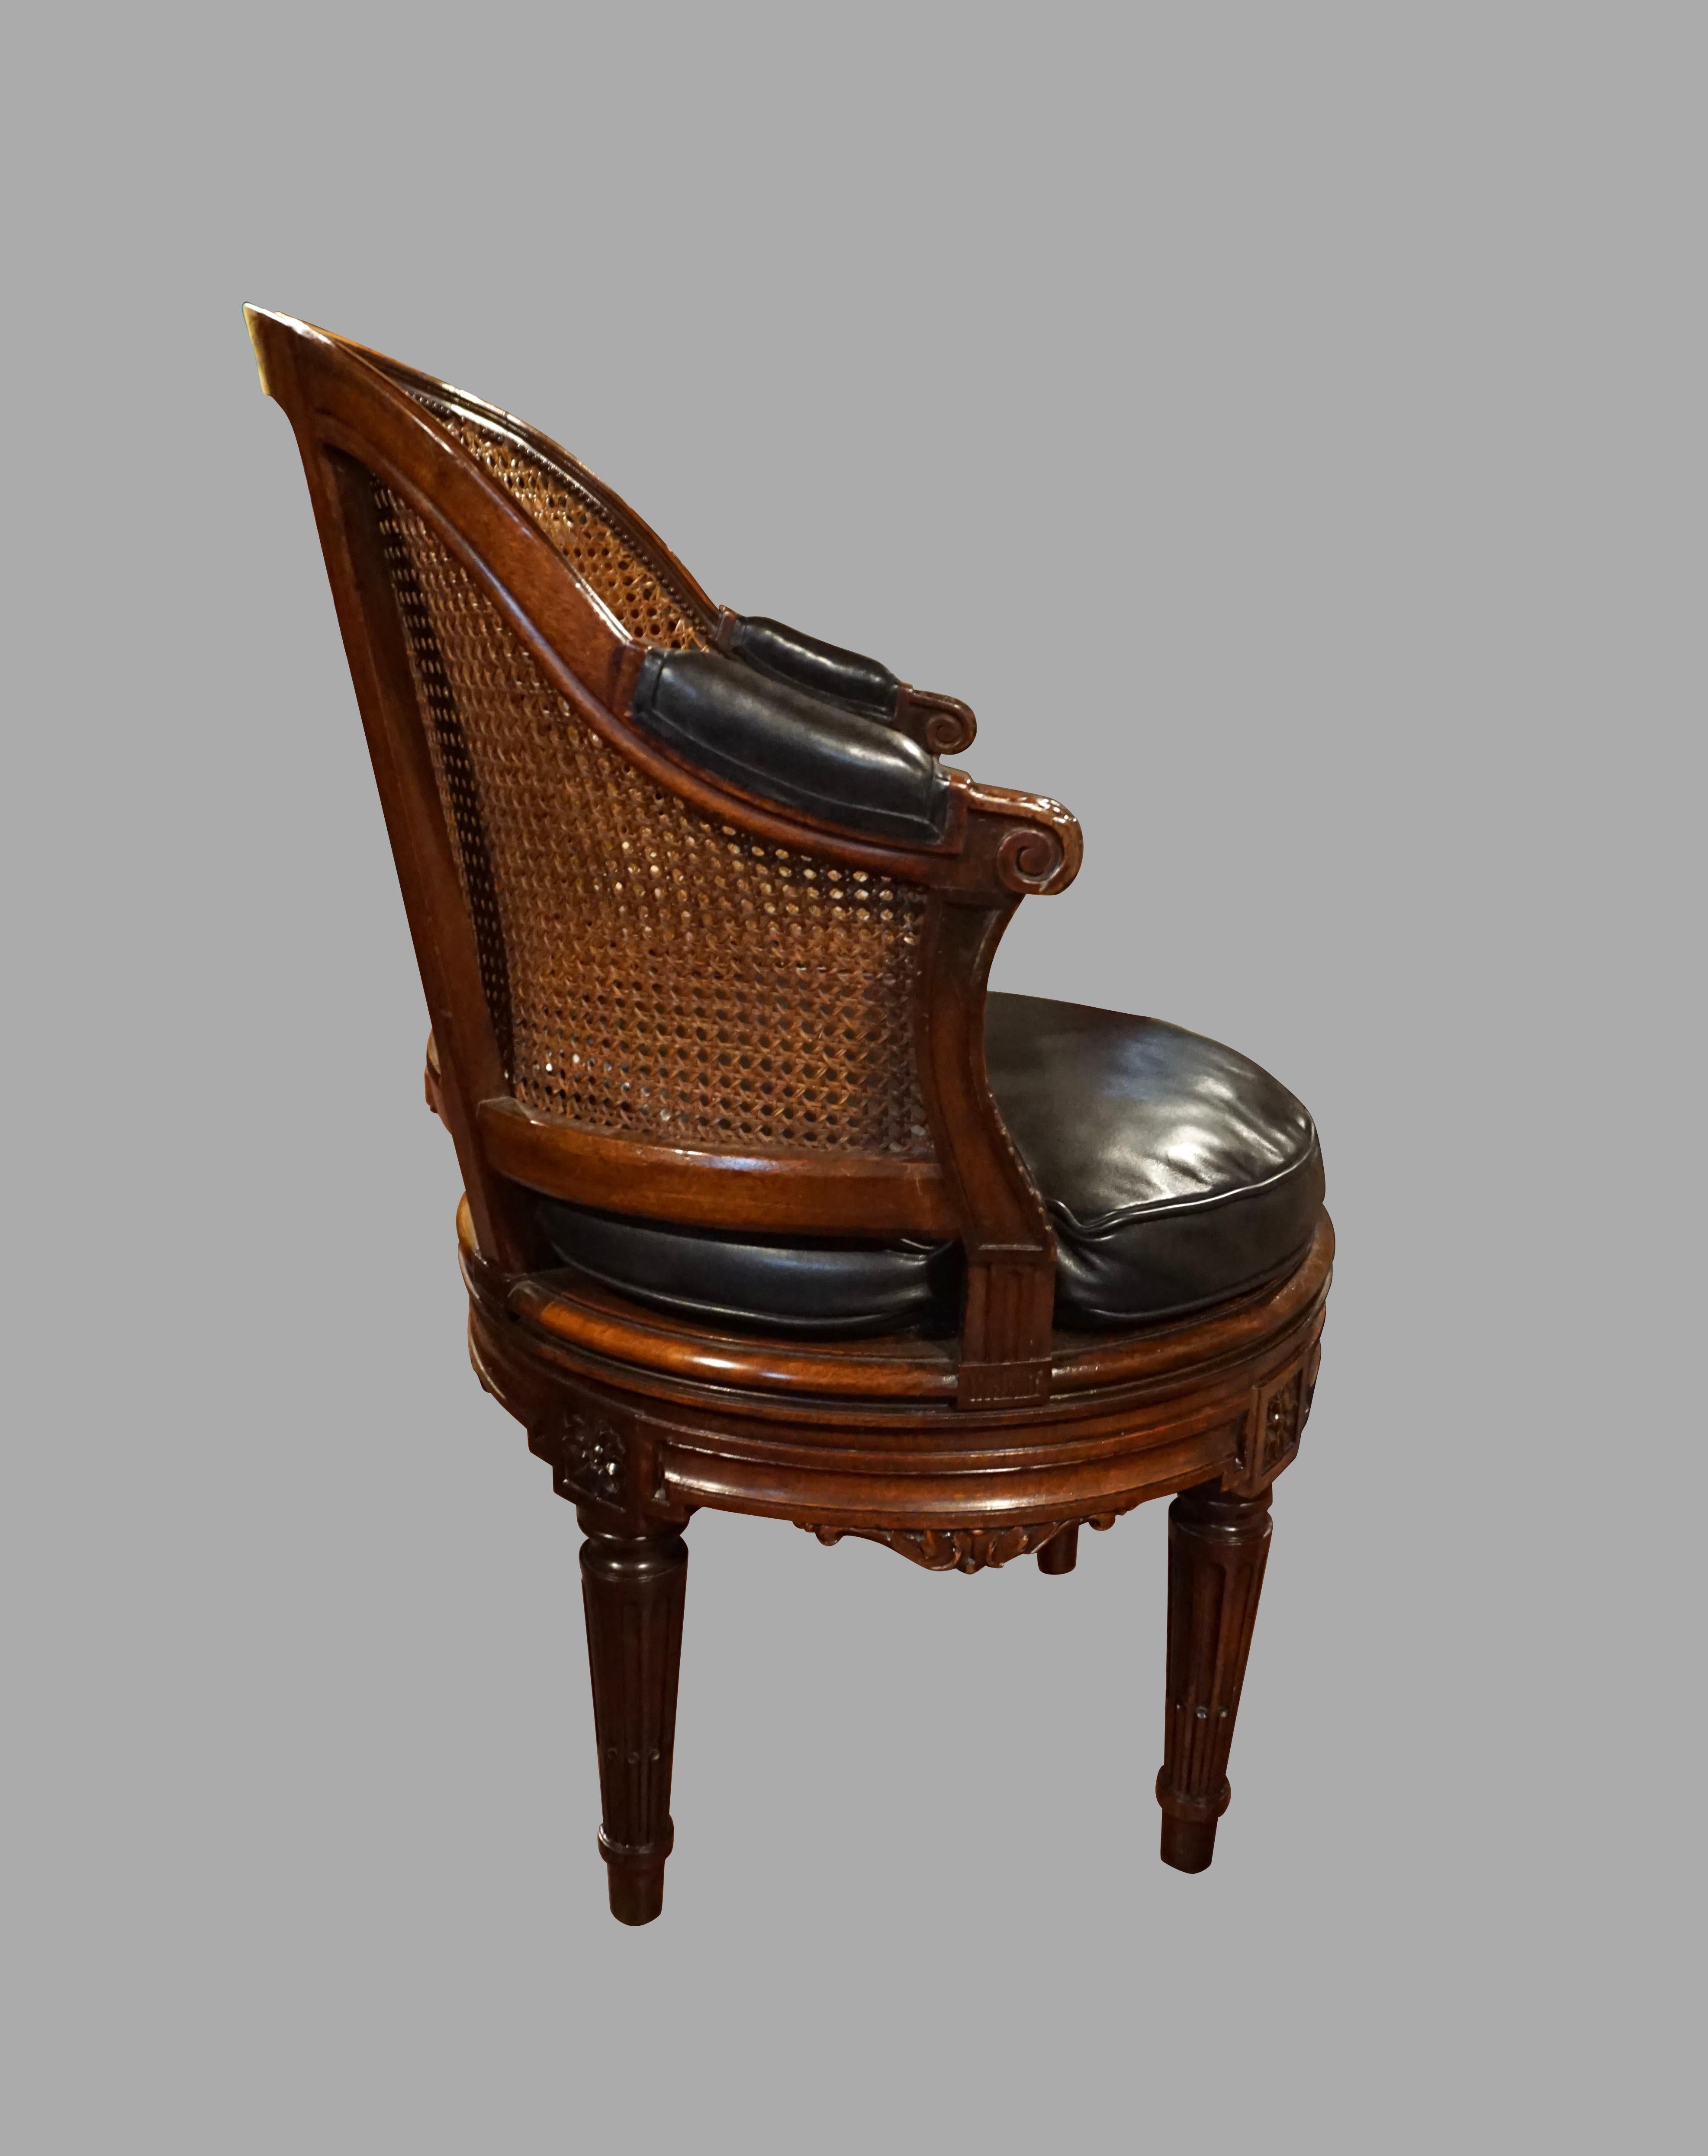 French Caned Louis XVI Style Carved Walnut Swivel Desk Chair with Leather Seat 1